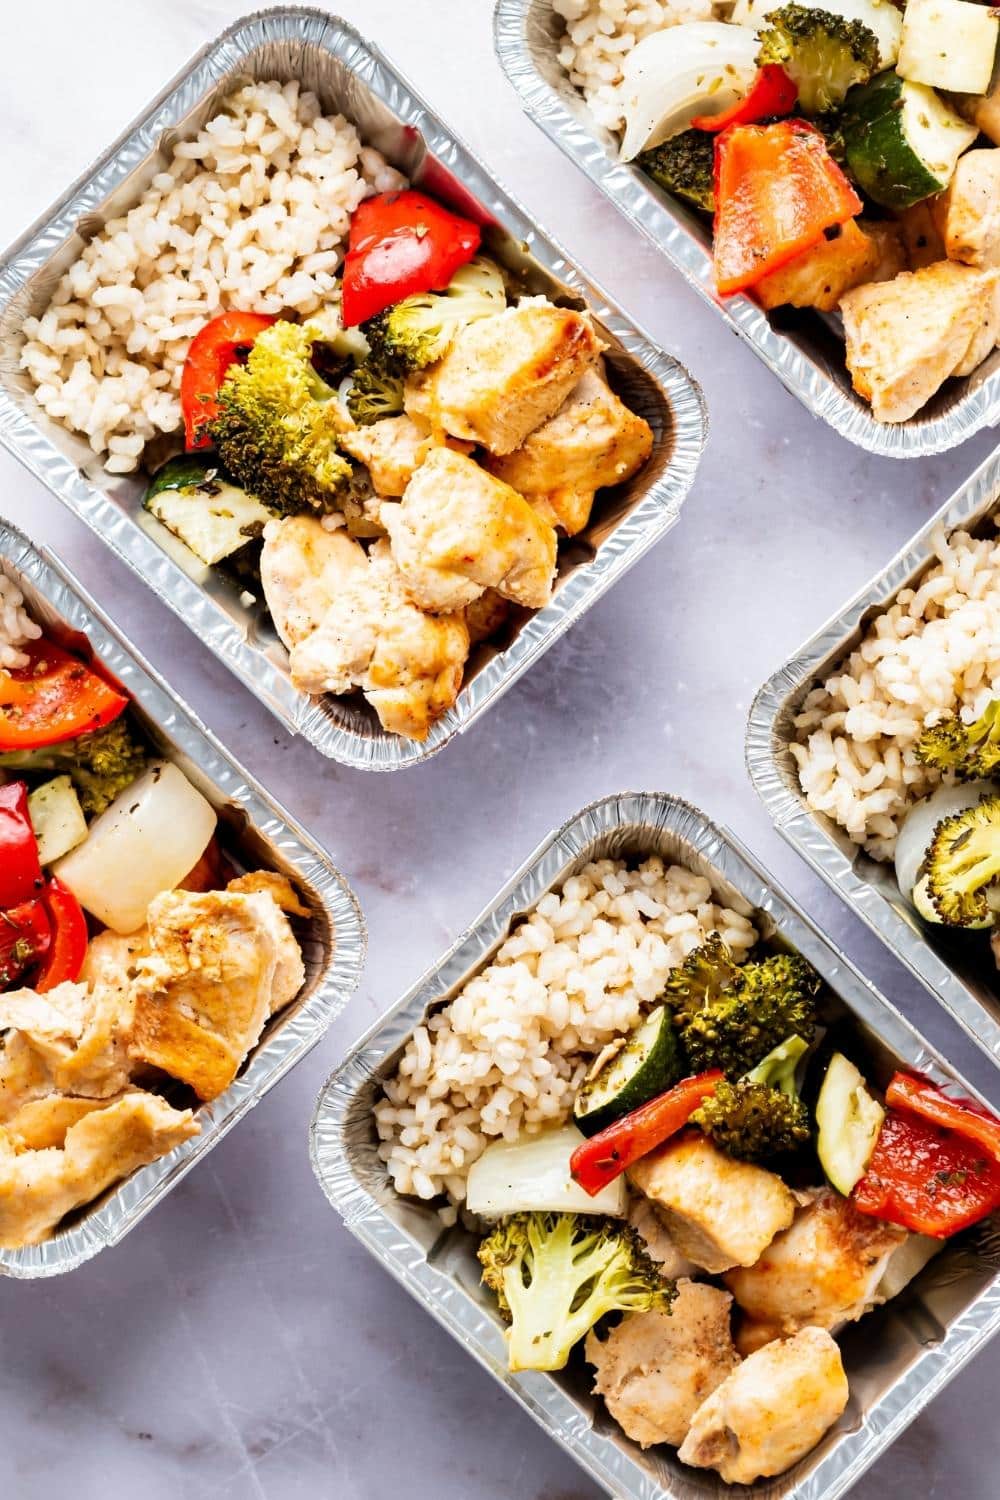 A few containers filled with chicken, rice, and veggies.